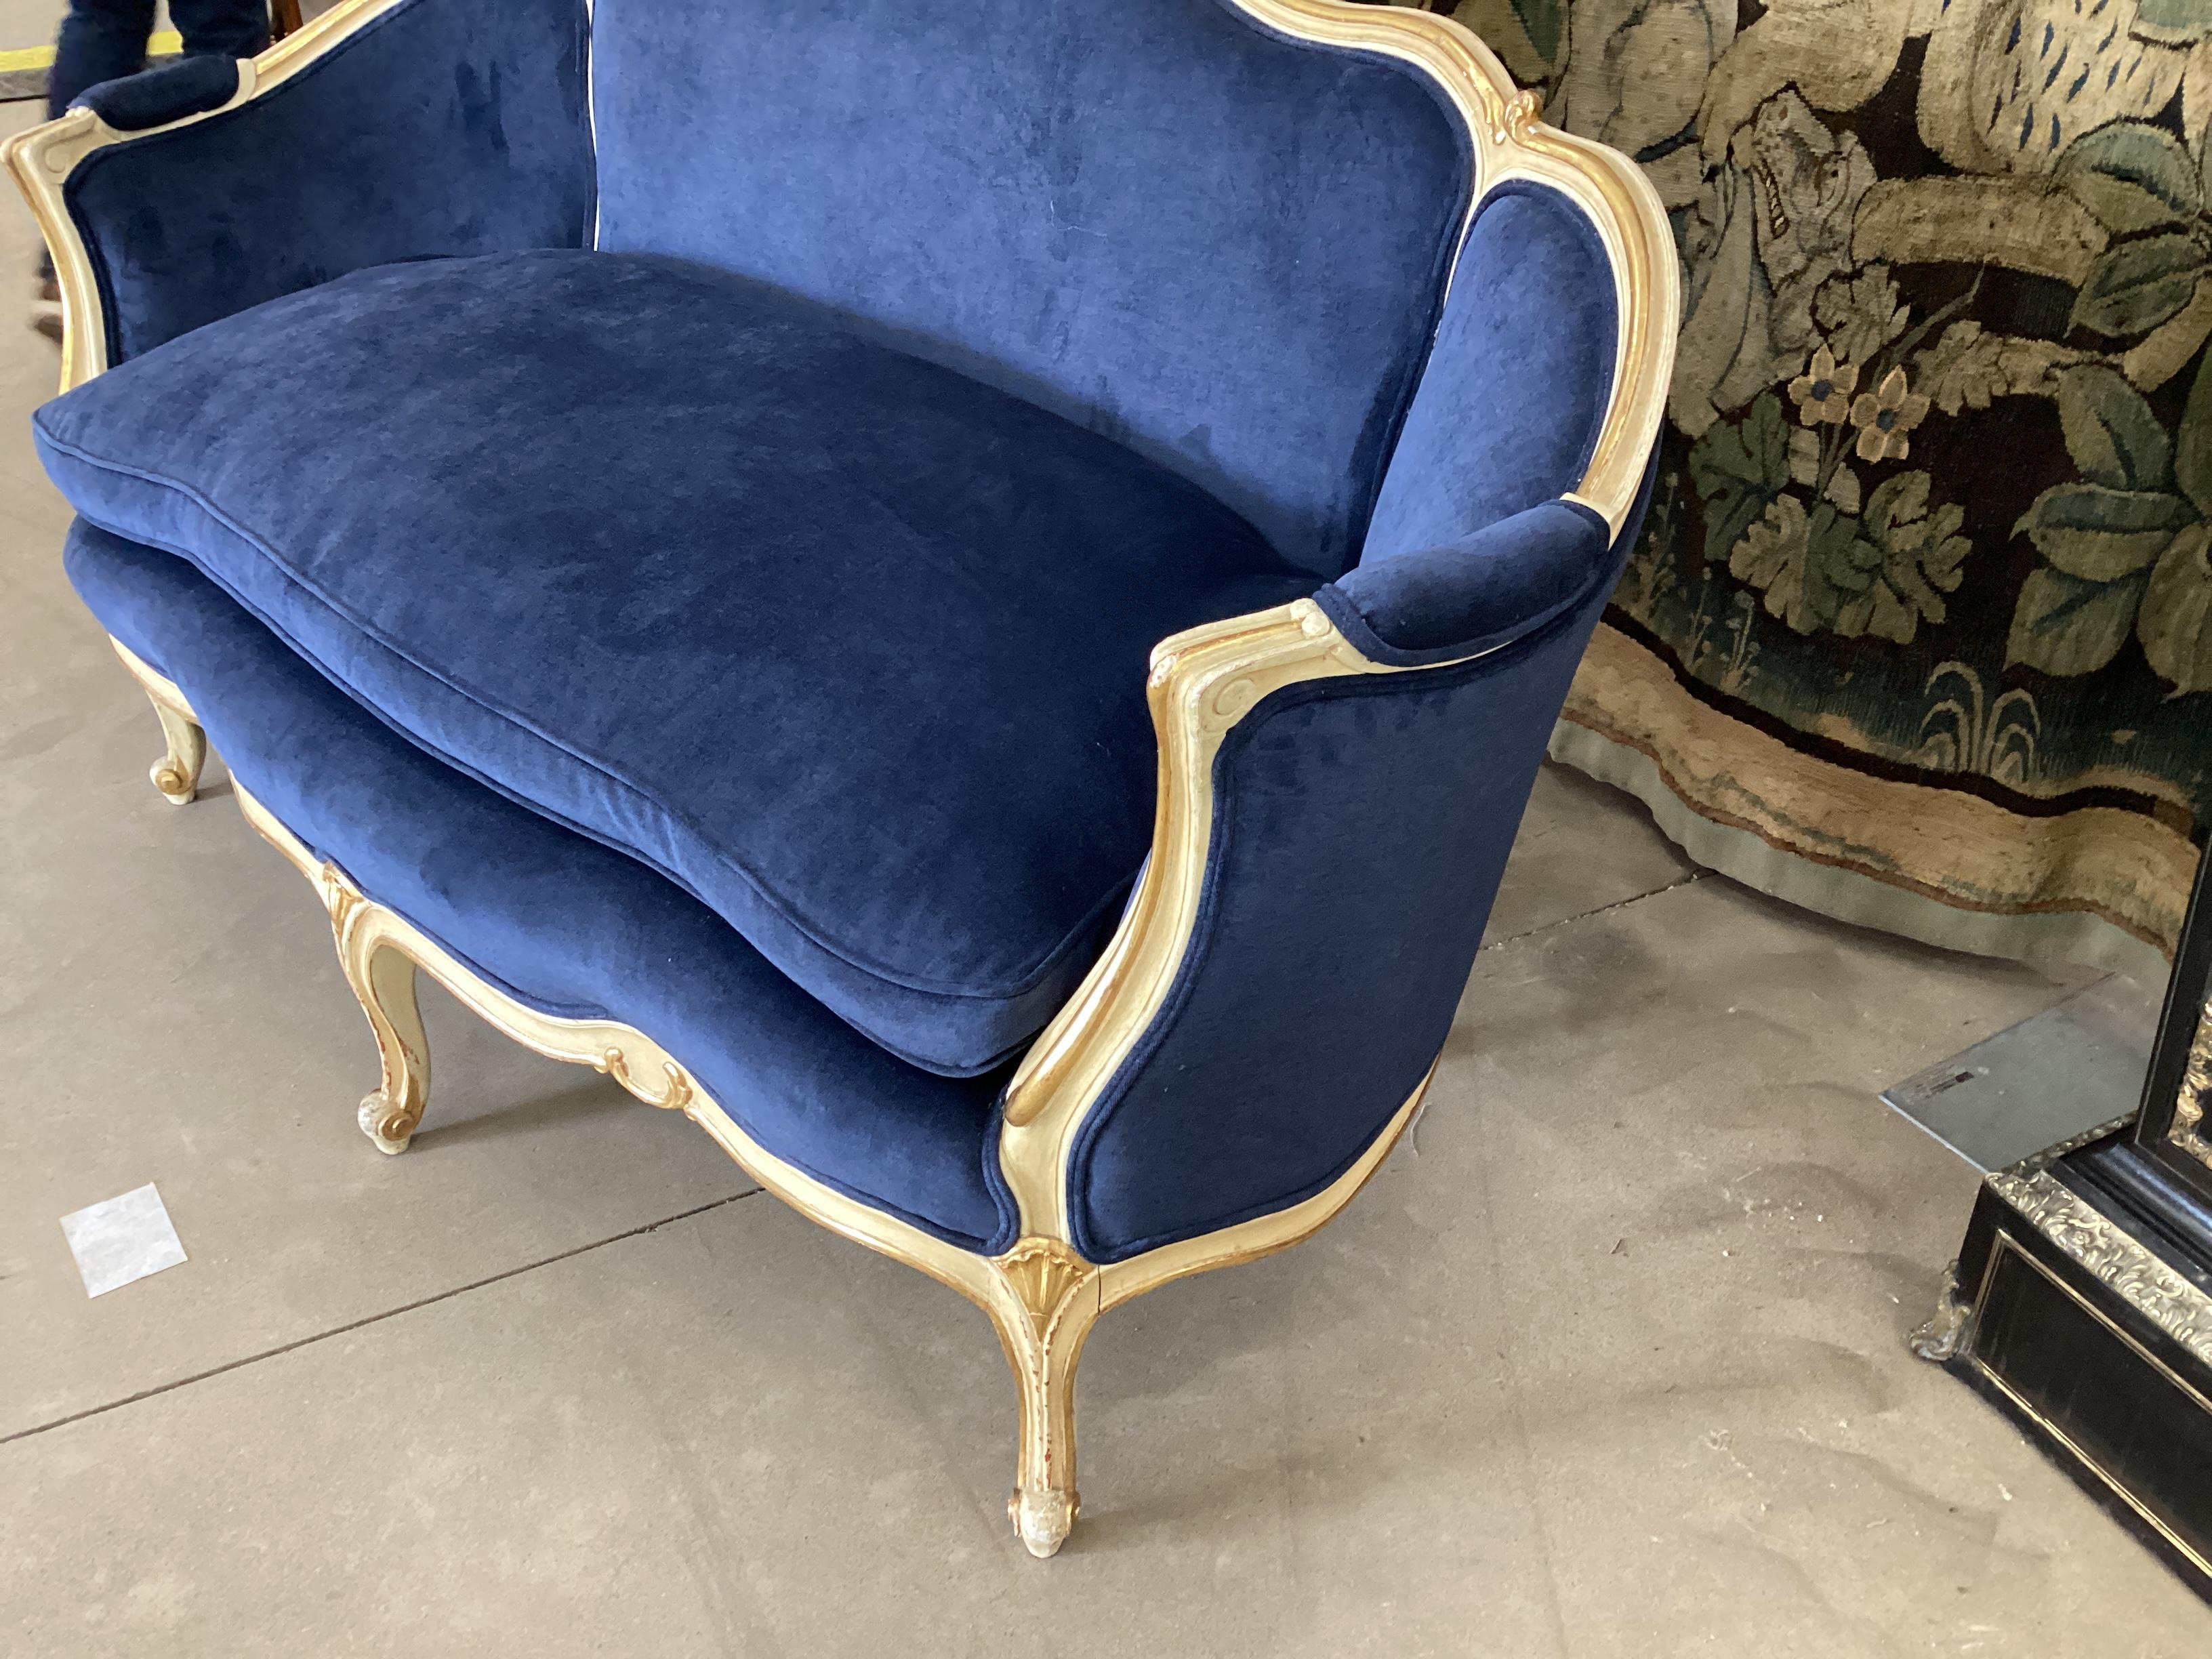 Antique Louis XV Style Painted and Gilt Settee (2 Available) For Sale 4